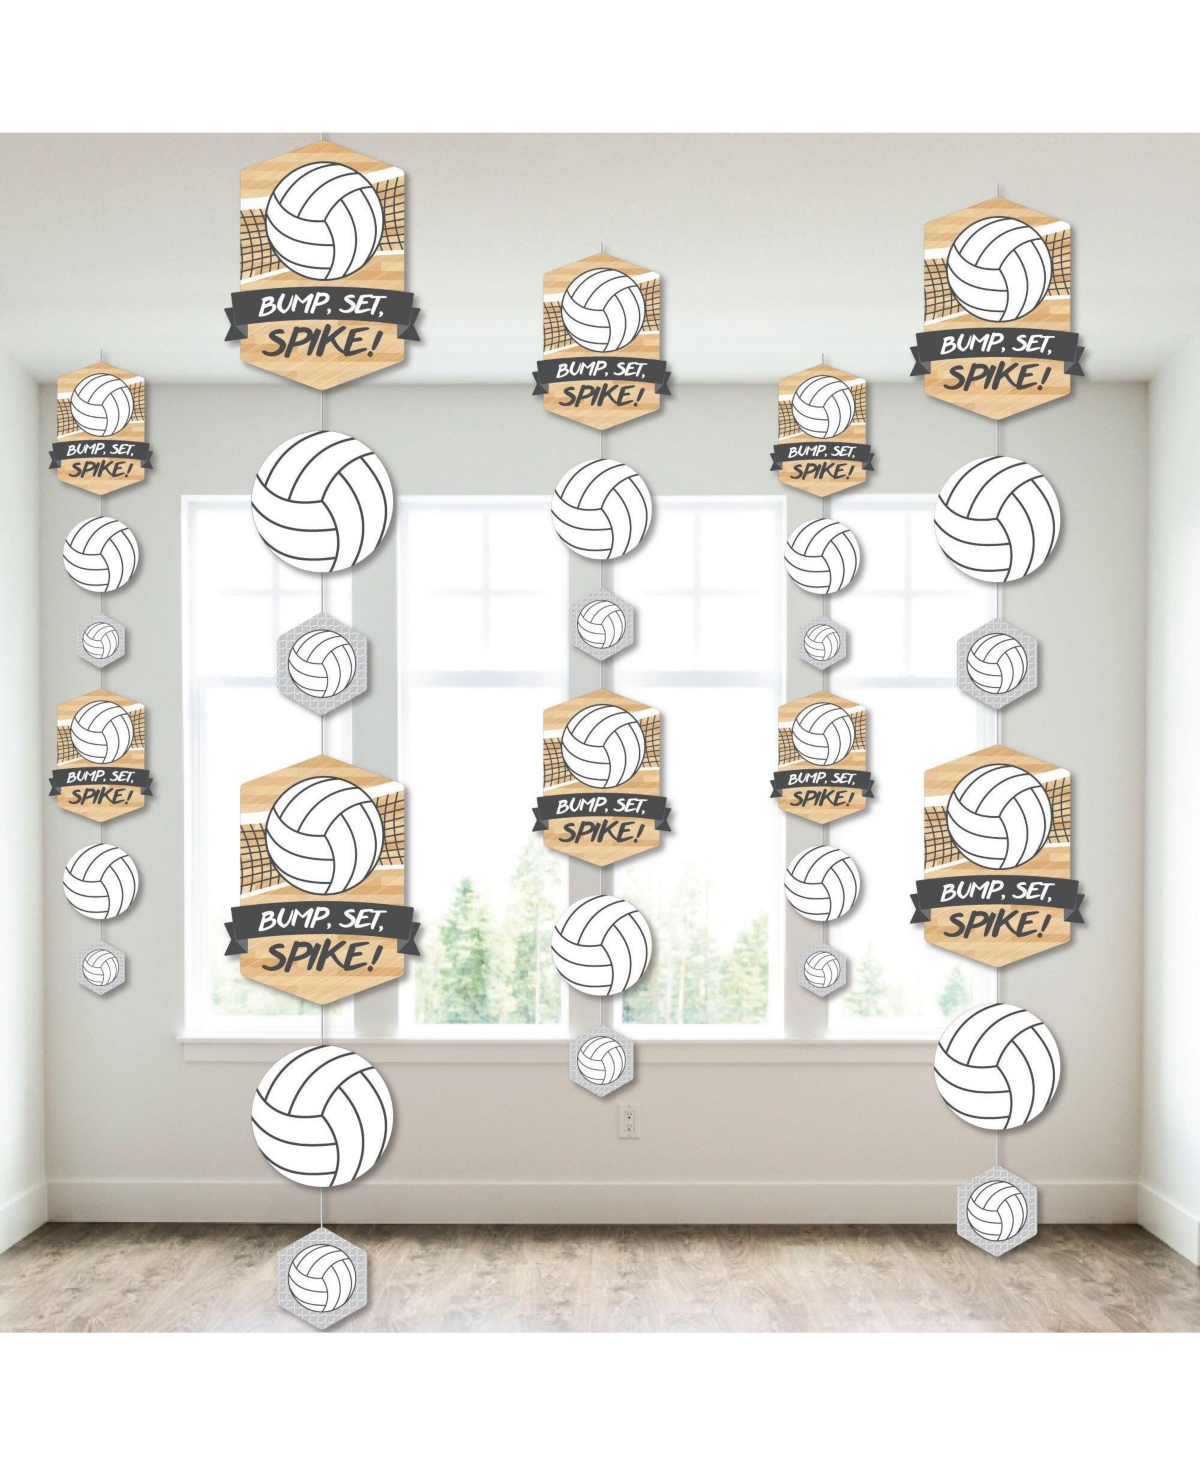 Bump, Set, Spike - Volleyball - Birthday Party Hanging Vertical Decor - 30 Pc